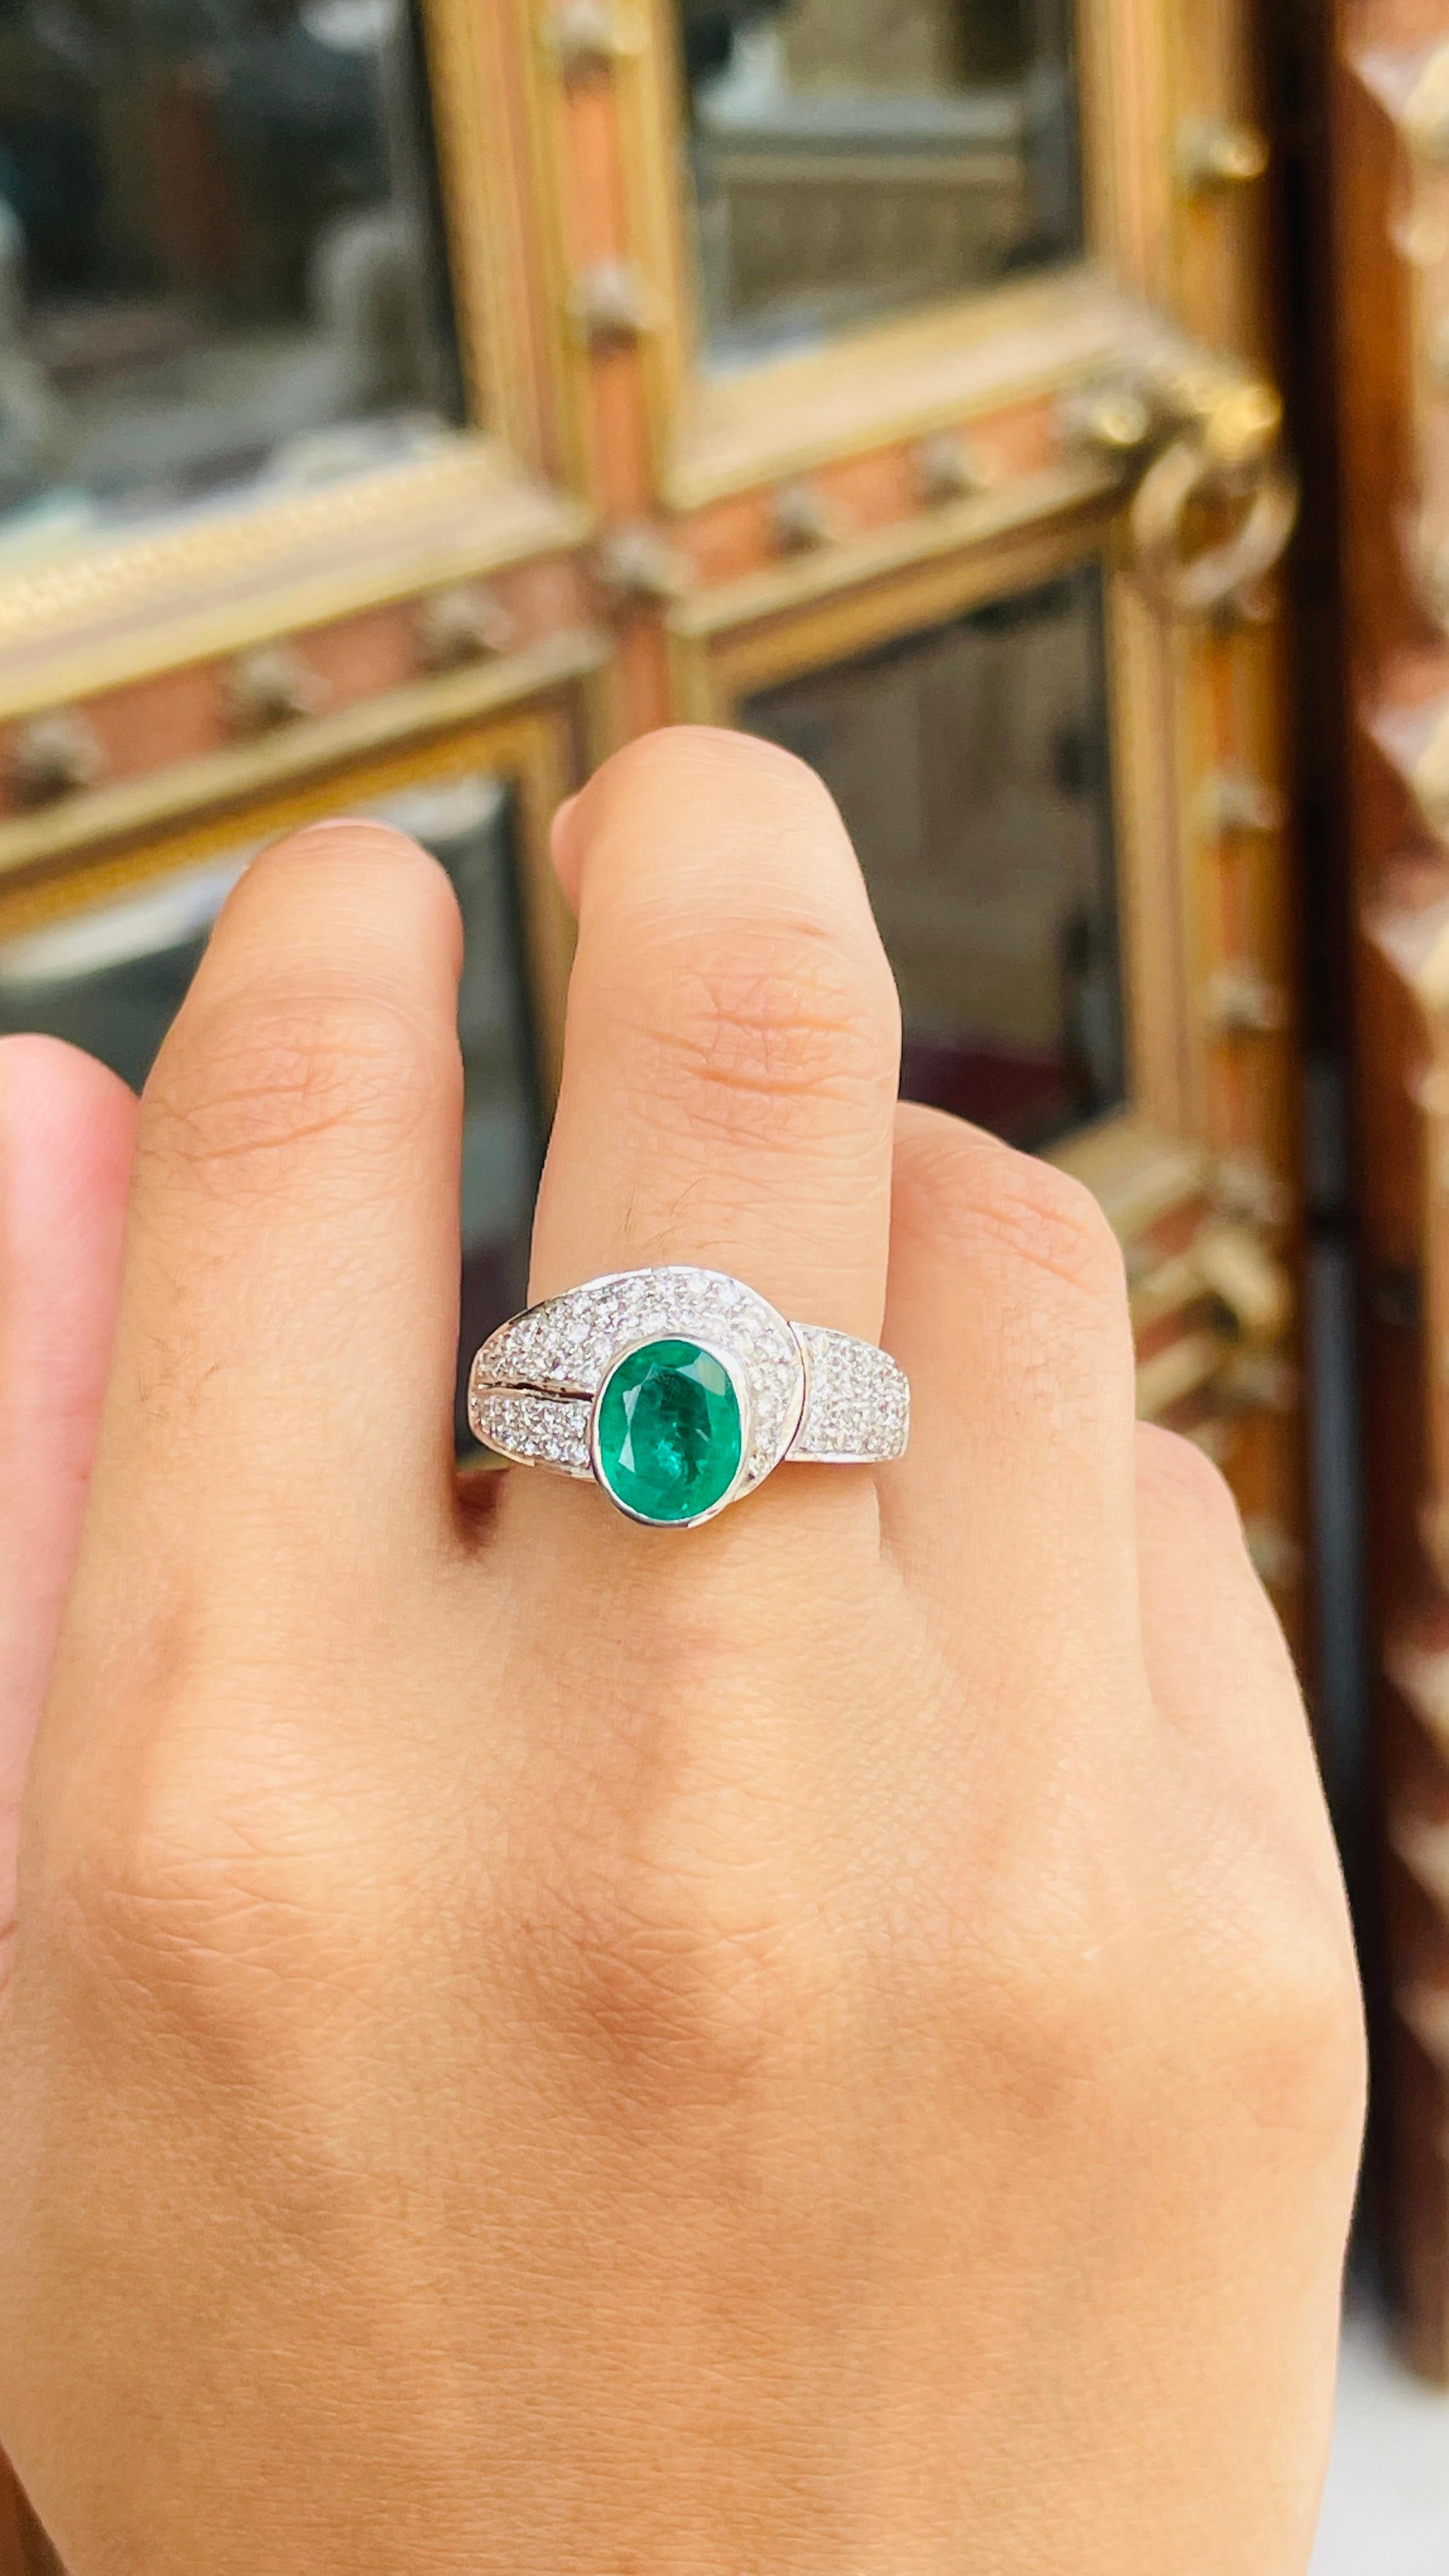 For Sale:  2.45 Carat Emerald and Diamond Ring in 18K White Gold  4